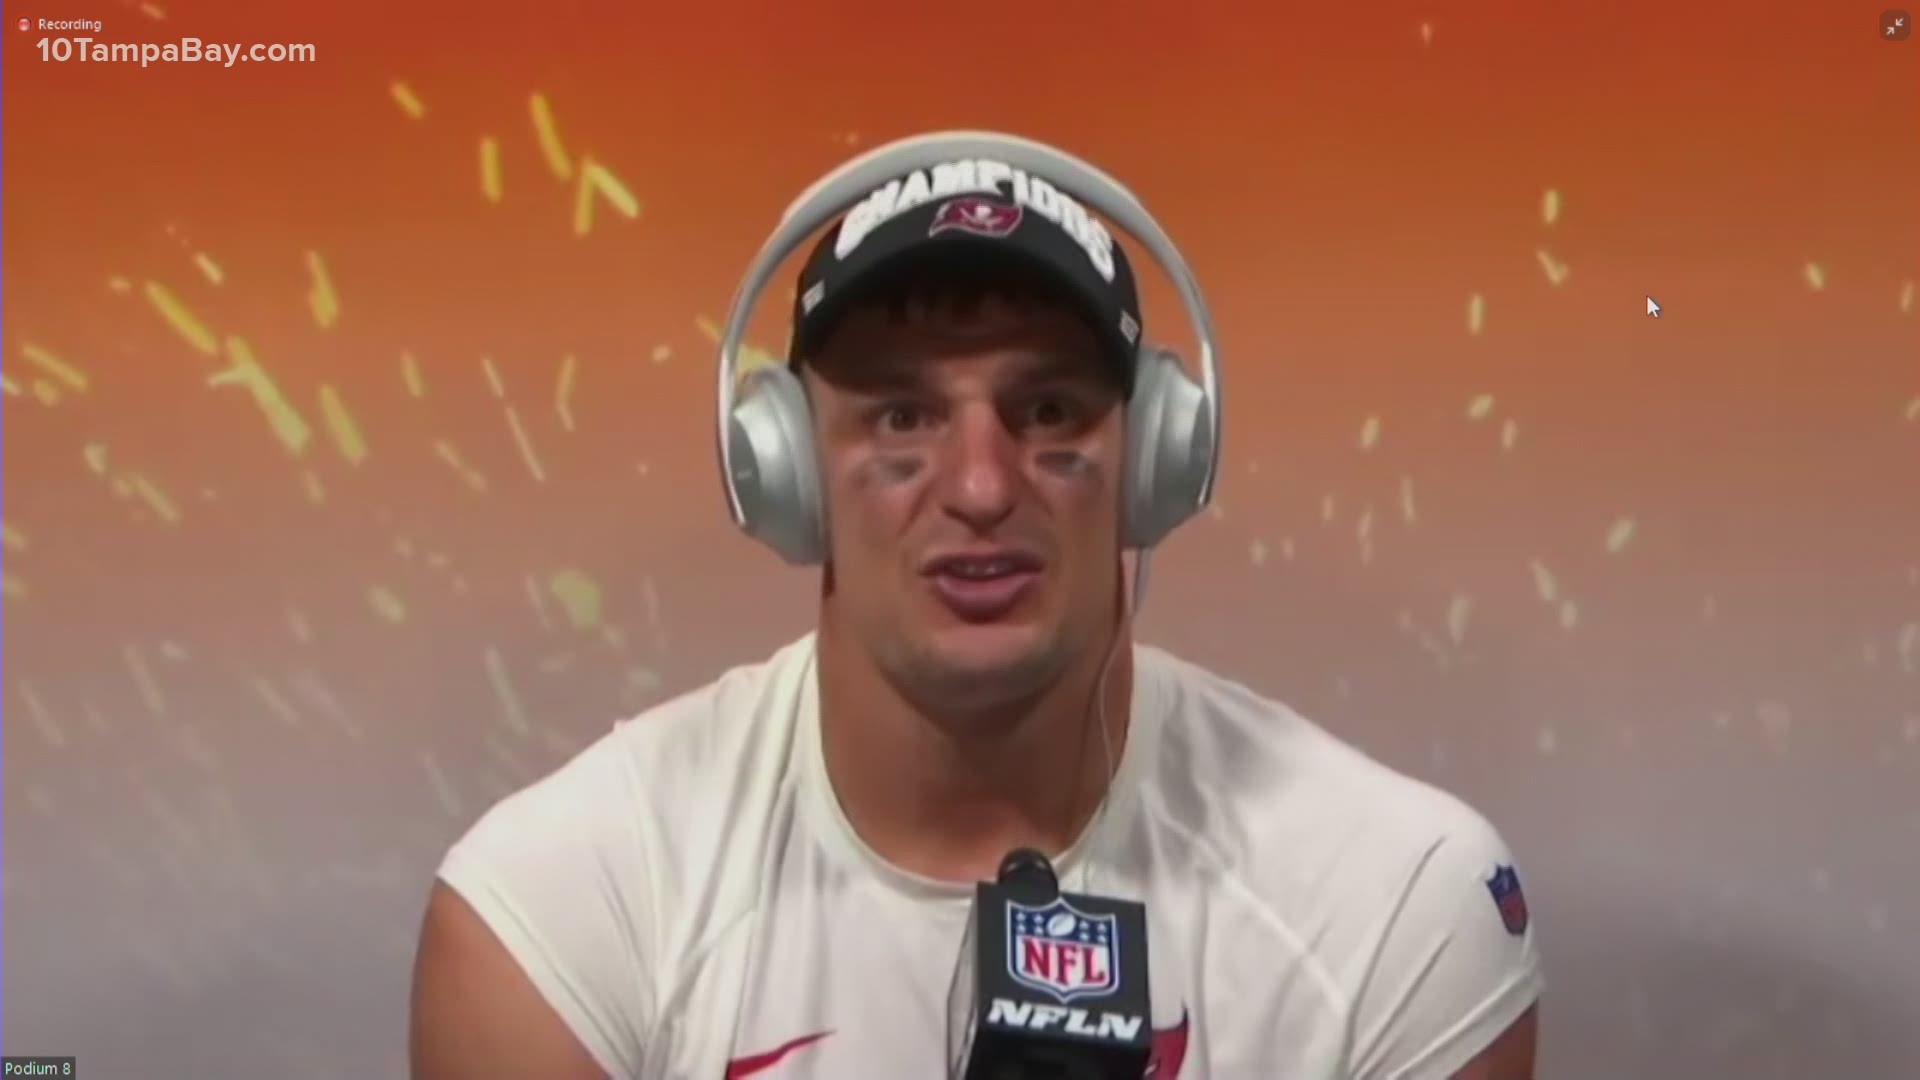 Rob Gronkowski connected with Tampa Bay Buccaneers quarterback Tom Brady twice for two touchdowns.